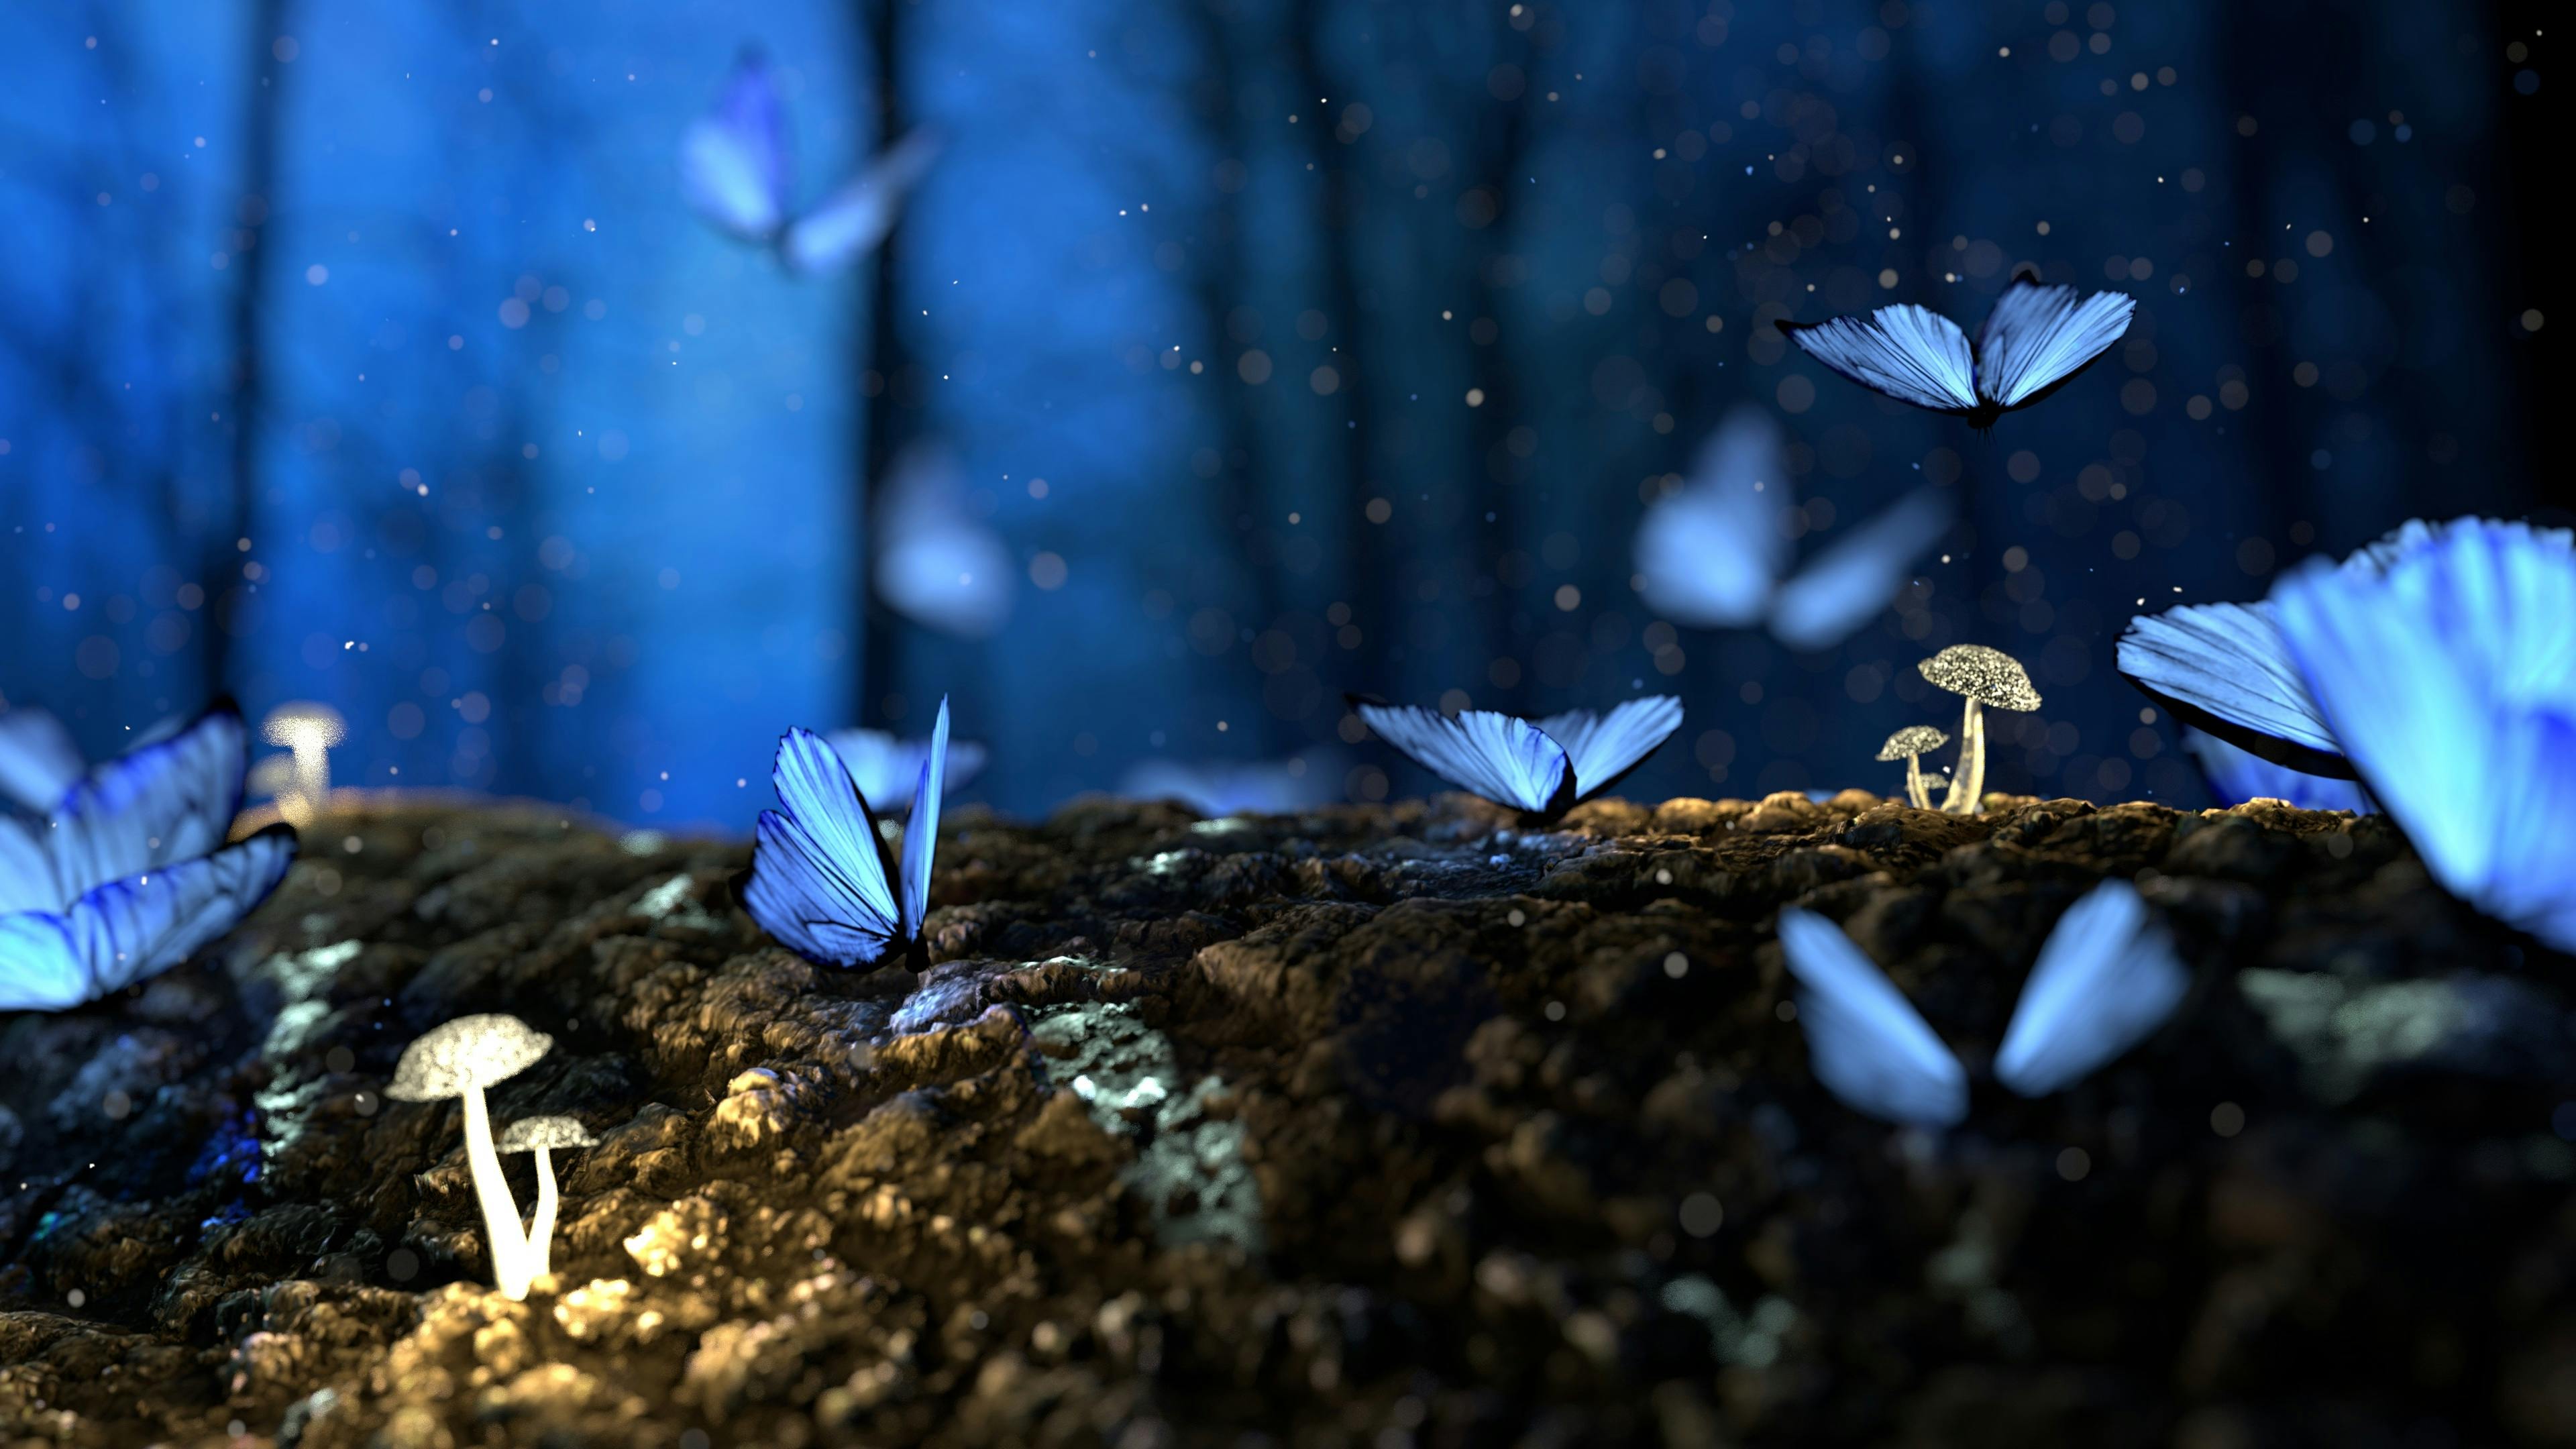 Butterflies stock photos, royalty-free images, vectors, video